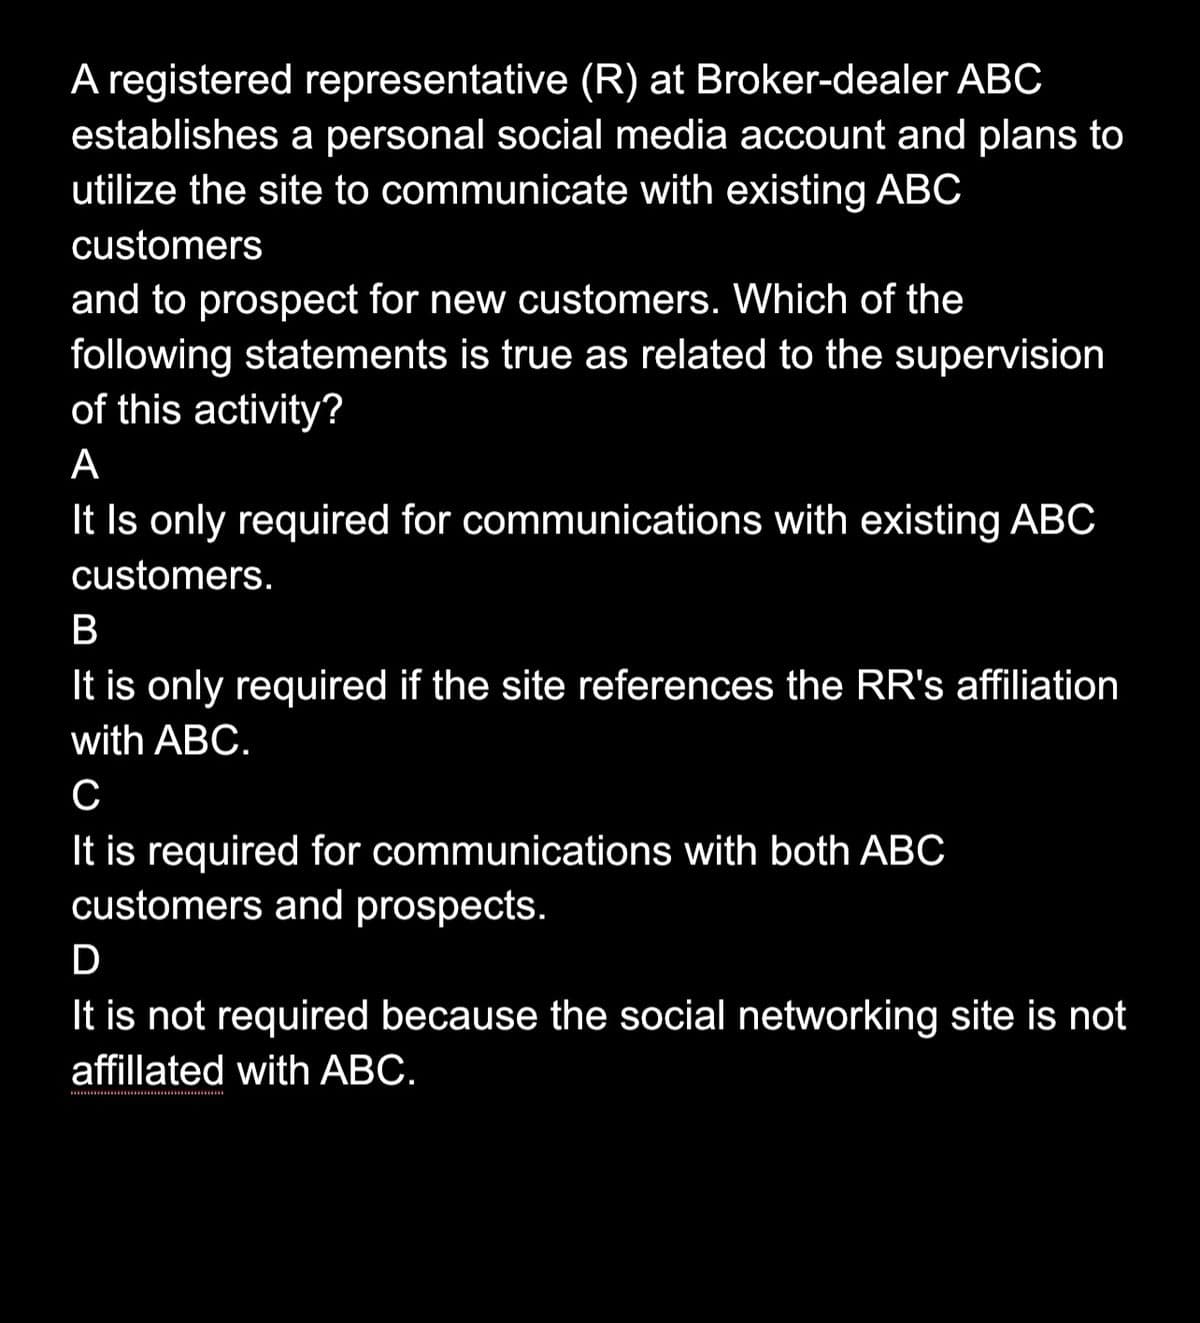 A registered representative (R) at Broker-dealer ABC
establishes a personal social media account and plans to
utilize the site to communicate with existing ABC
customers
and to prospect for new customers. Which of the
following statements is true as related to the supervision
of this activity?
A
It Is only required for communications with existing ABC
customers.
B
It is only required if the site references the RR's affiliation
with ABC.
C
It is required for communications with both ABC
customers and prospects.
D
It is not required because the social networking site is not
affillated with ABC.